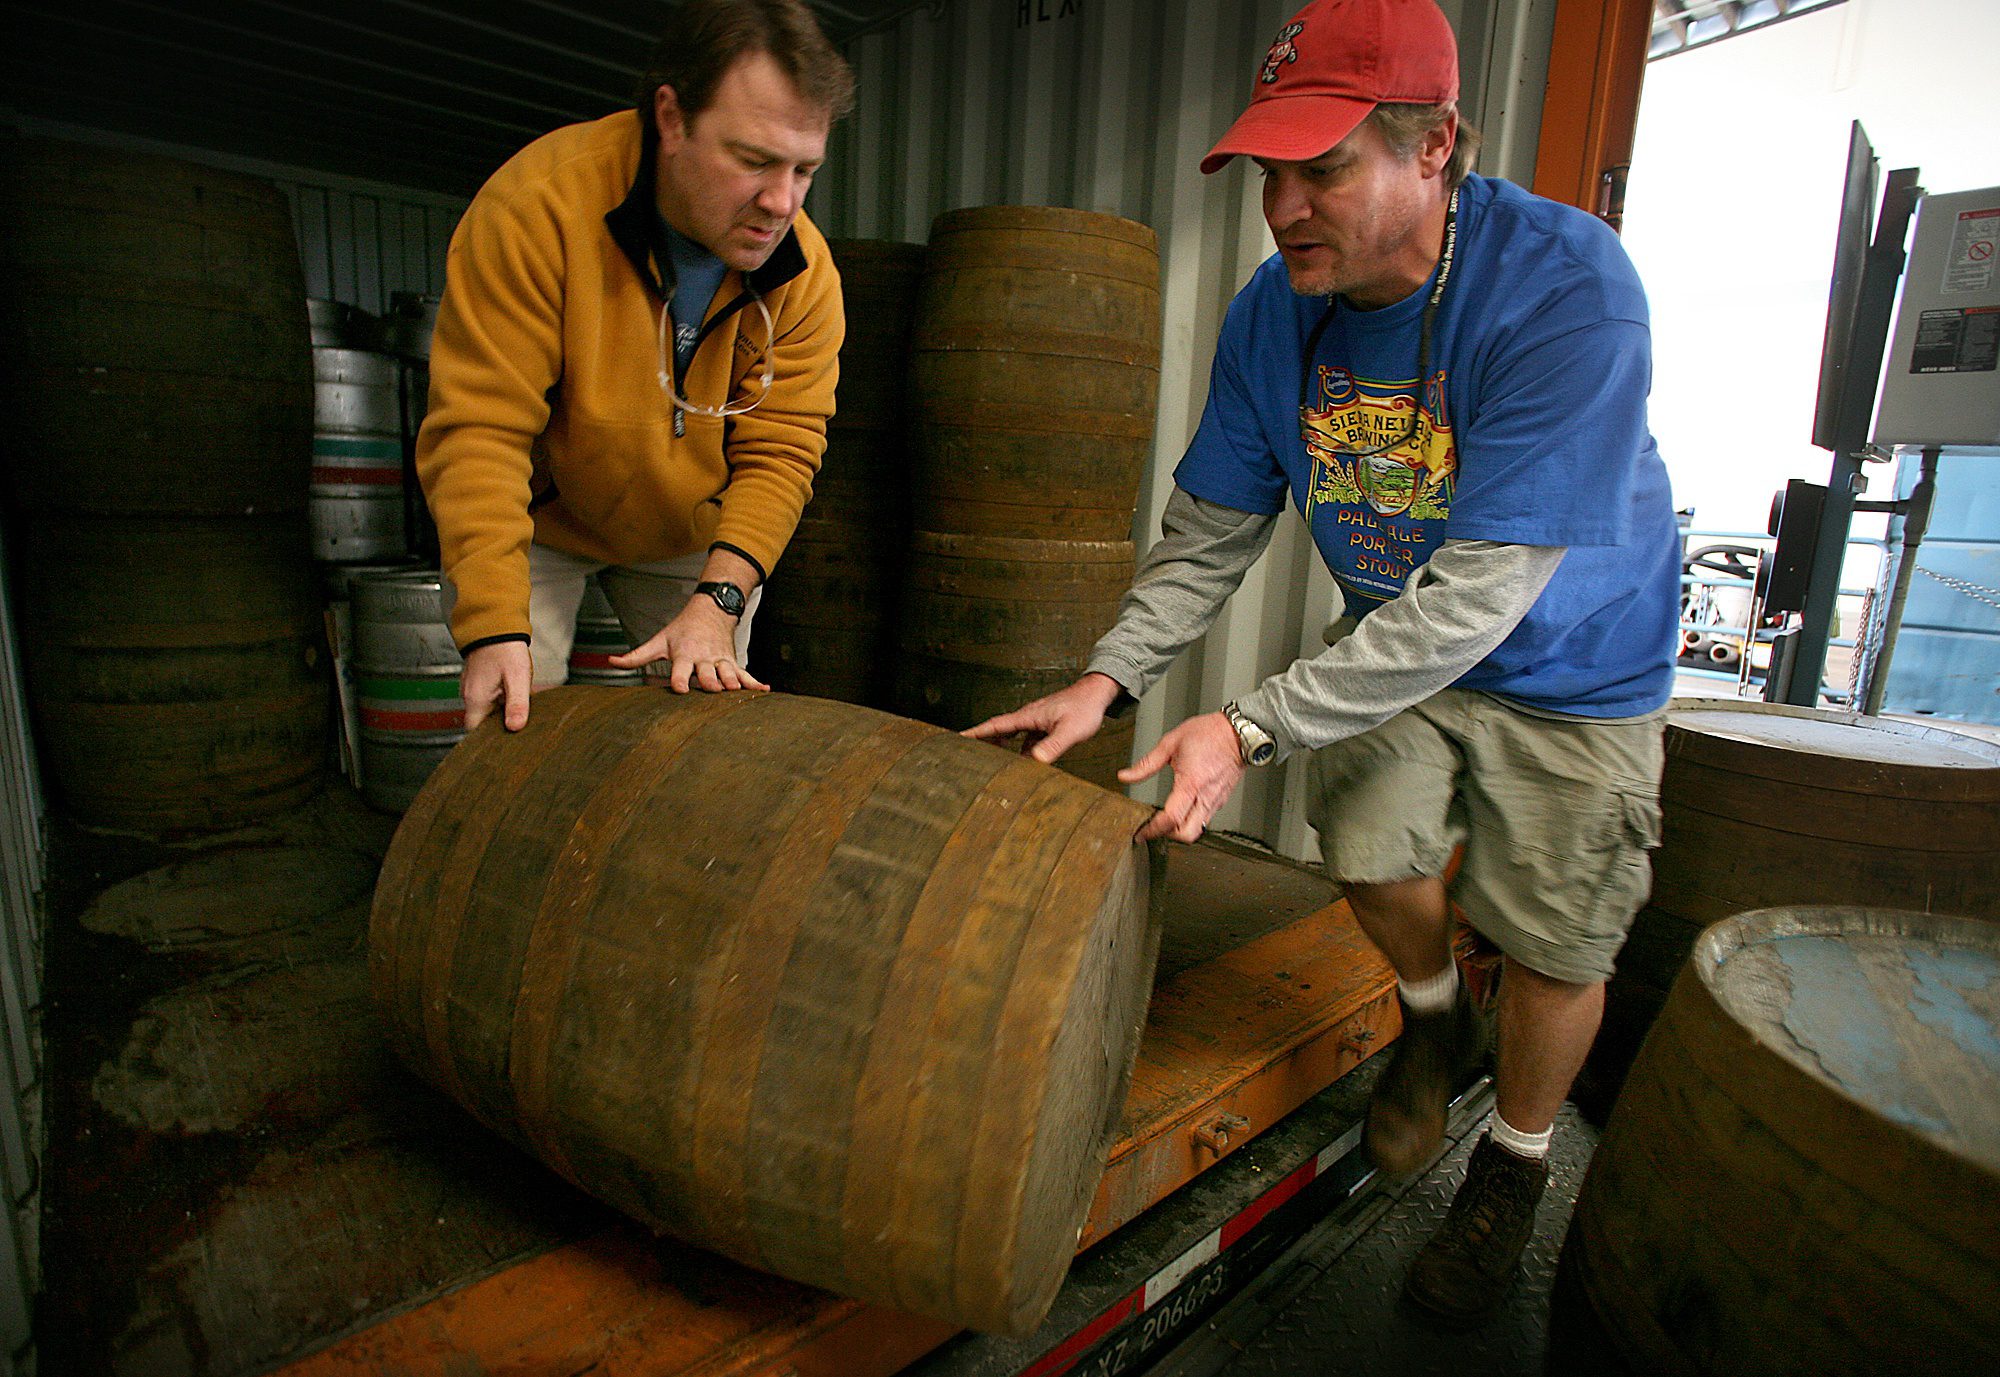 Two male brewers rolling a wooden barrel out of a delivery truck